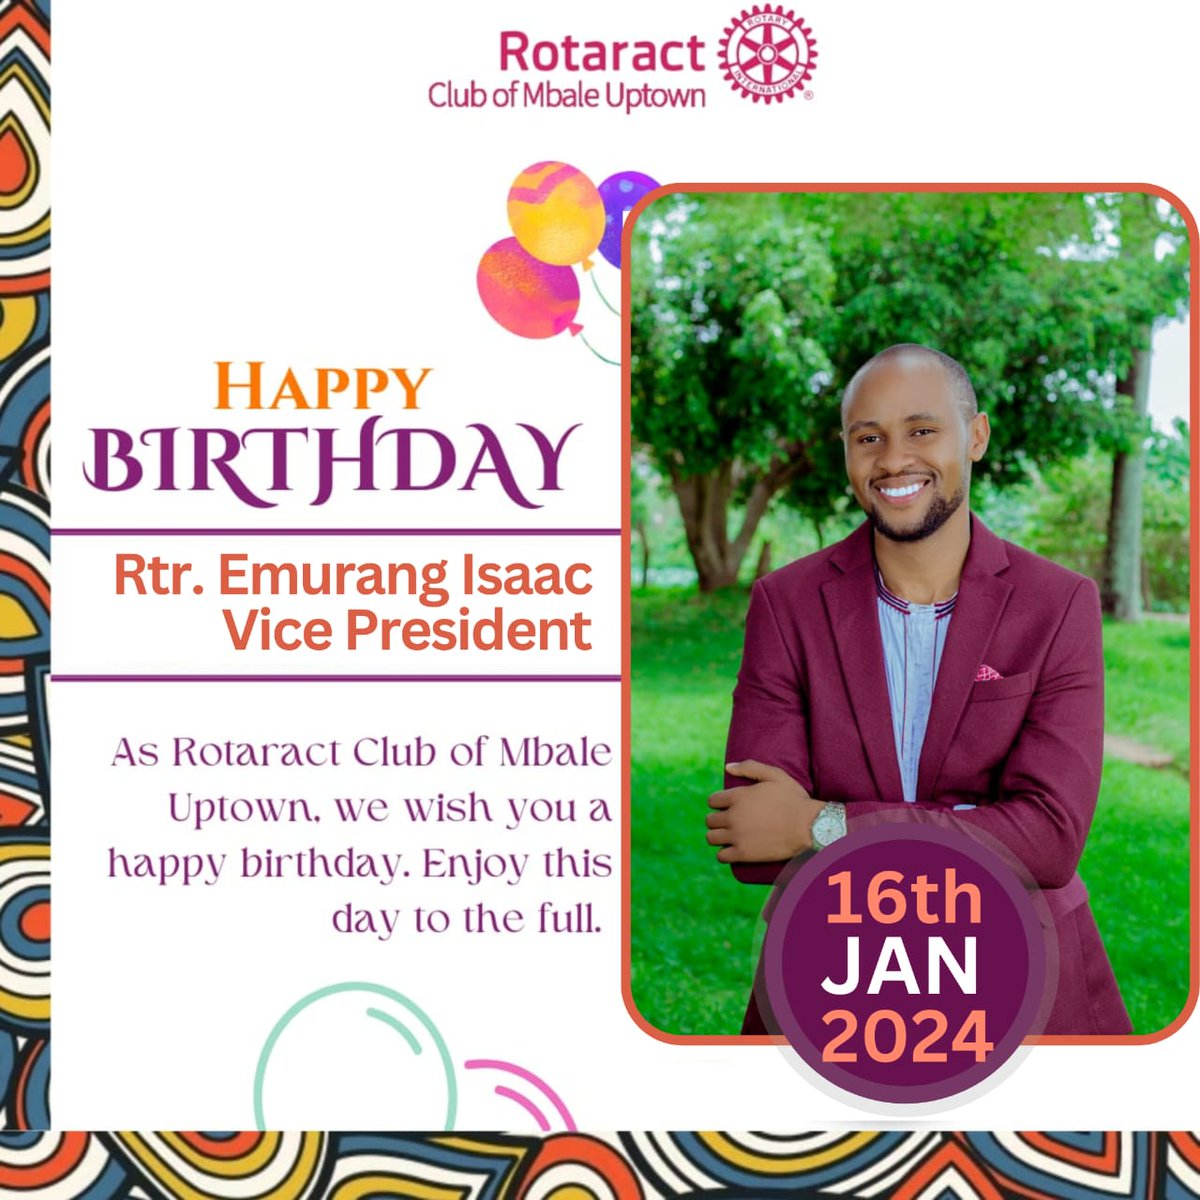 It's Cake day at Uptown Today! Happiest Birthday Mr Club Vice President @isaac_emrang 🥂 to more years of selfless service.